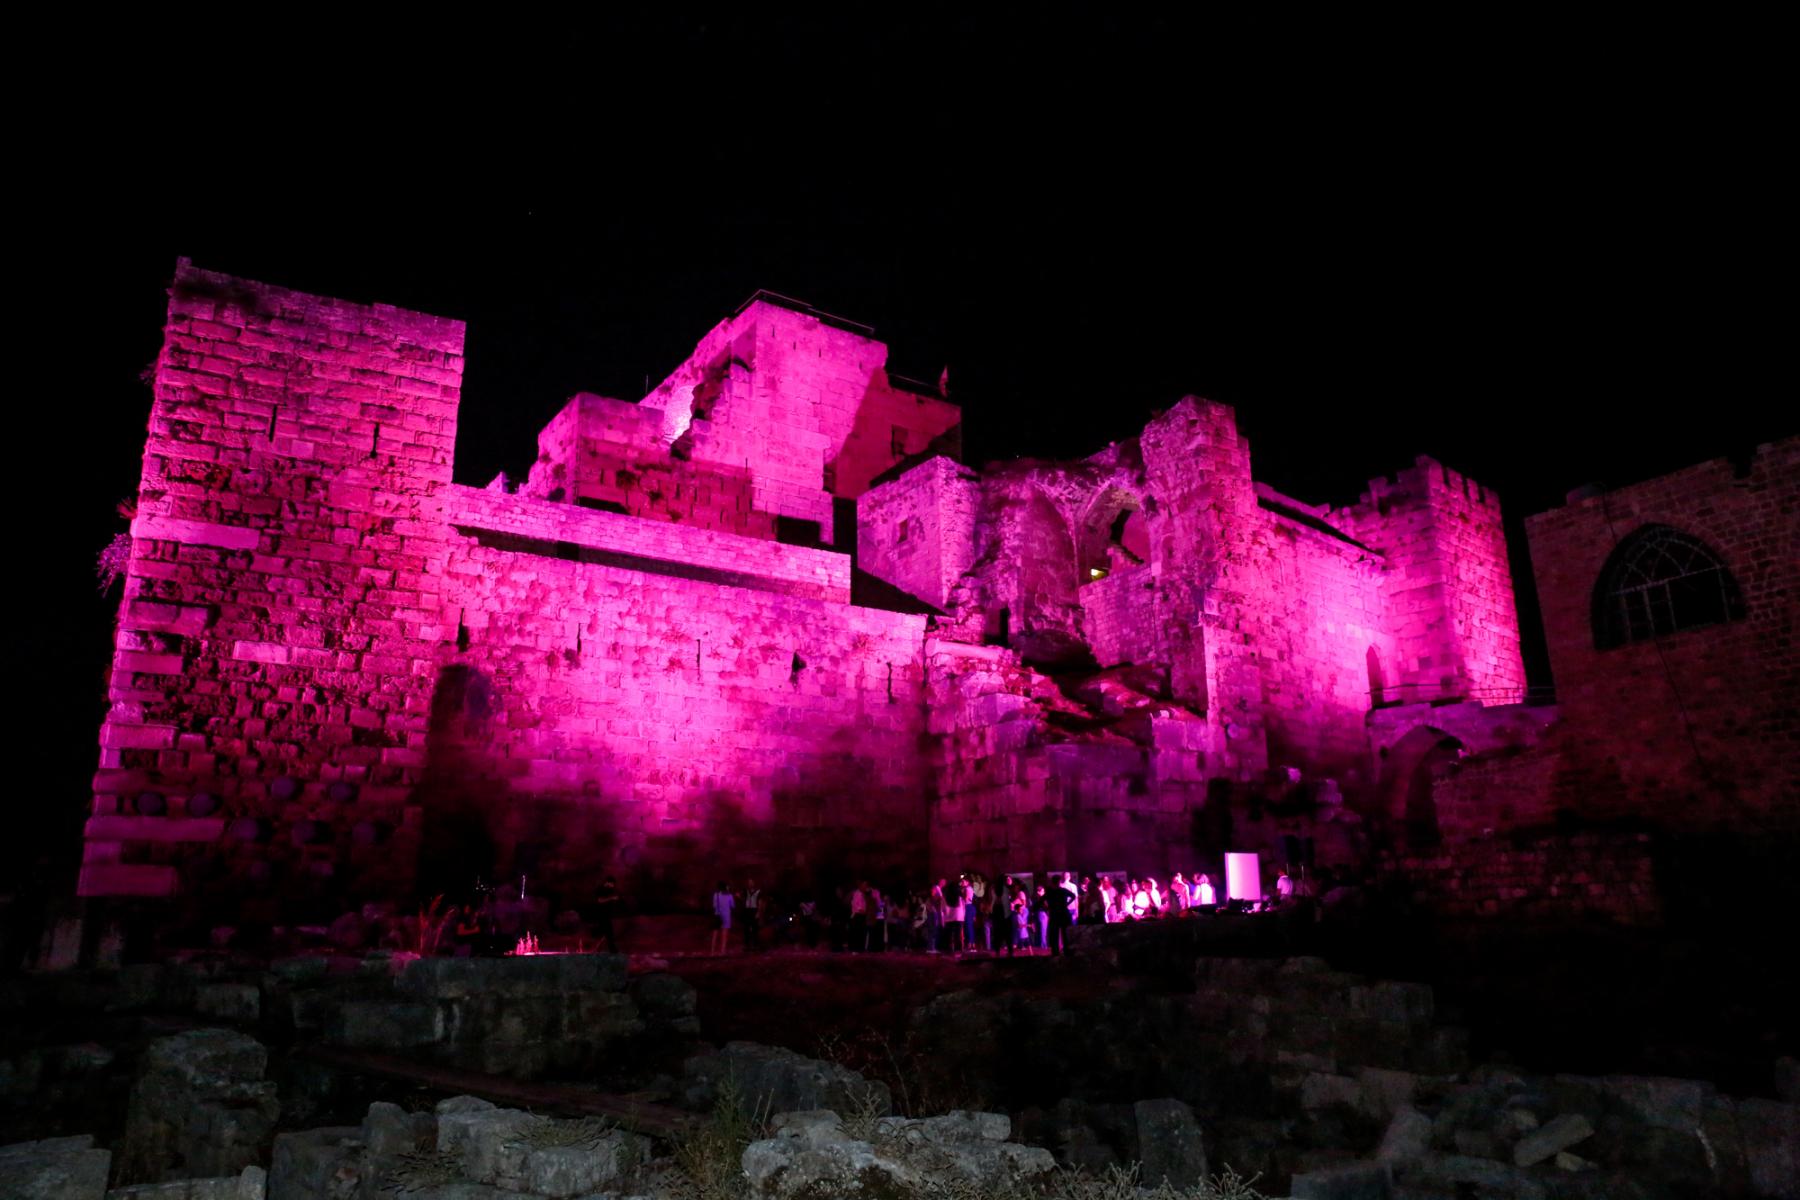 Byblos-Jbeil Castle at night, illuminated with pink lights